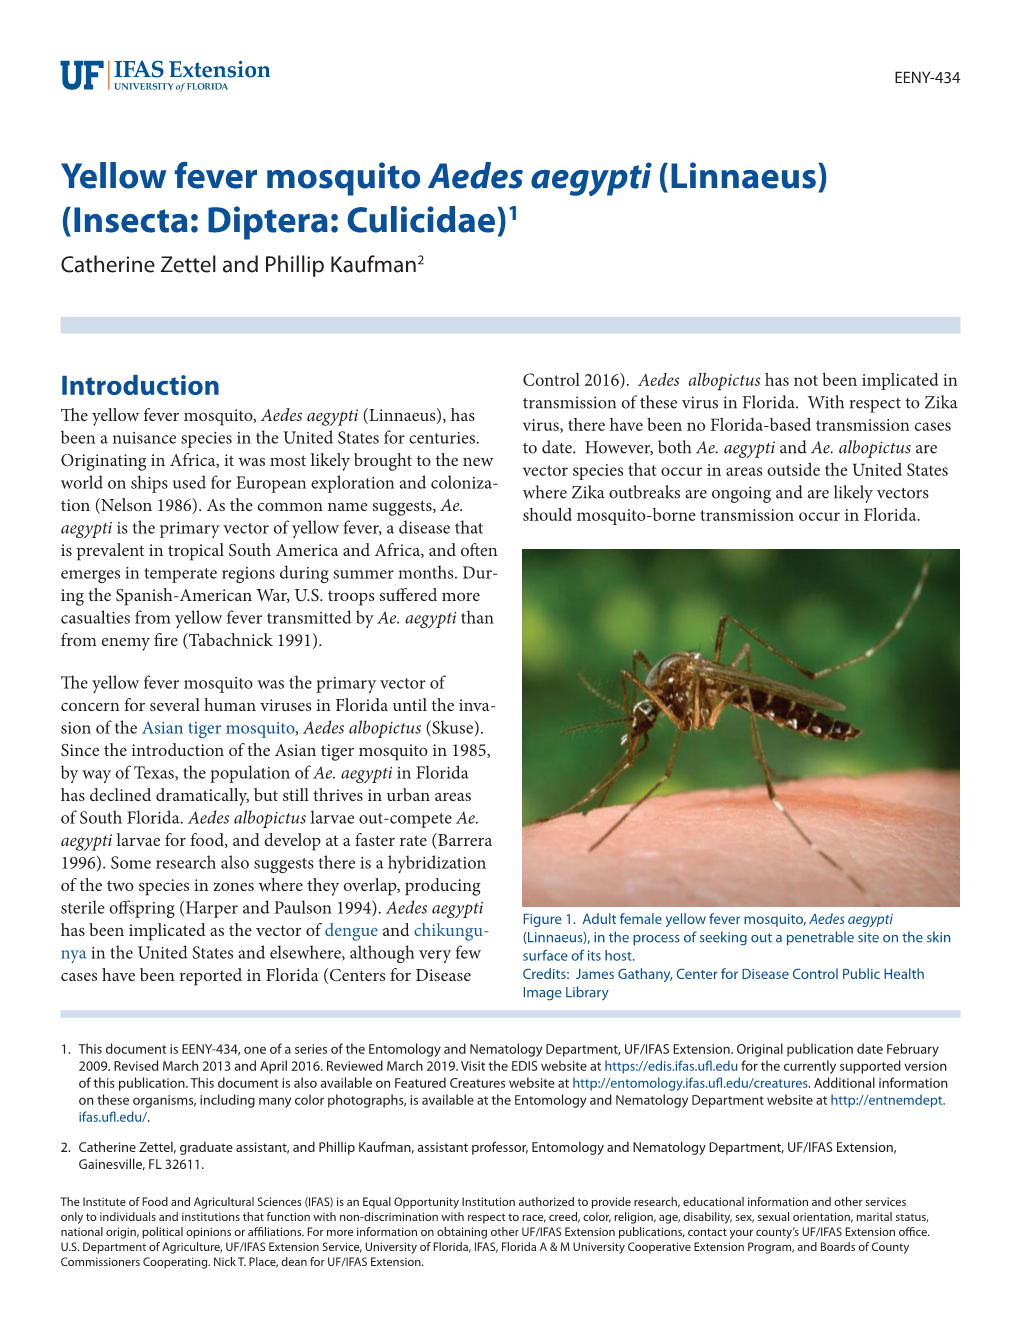 Yellow Fever Mosquito Aedes Aegypti (Linnaeus) (Insecta: Diptera: Culicidae)1 Catherine Zettel and Phillip Kaufman2